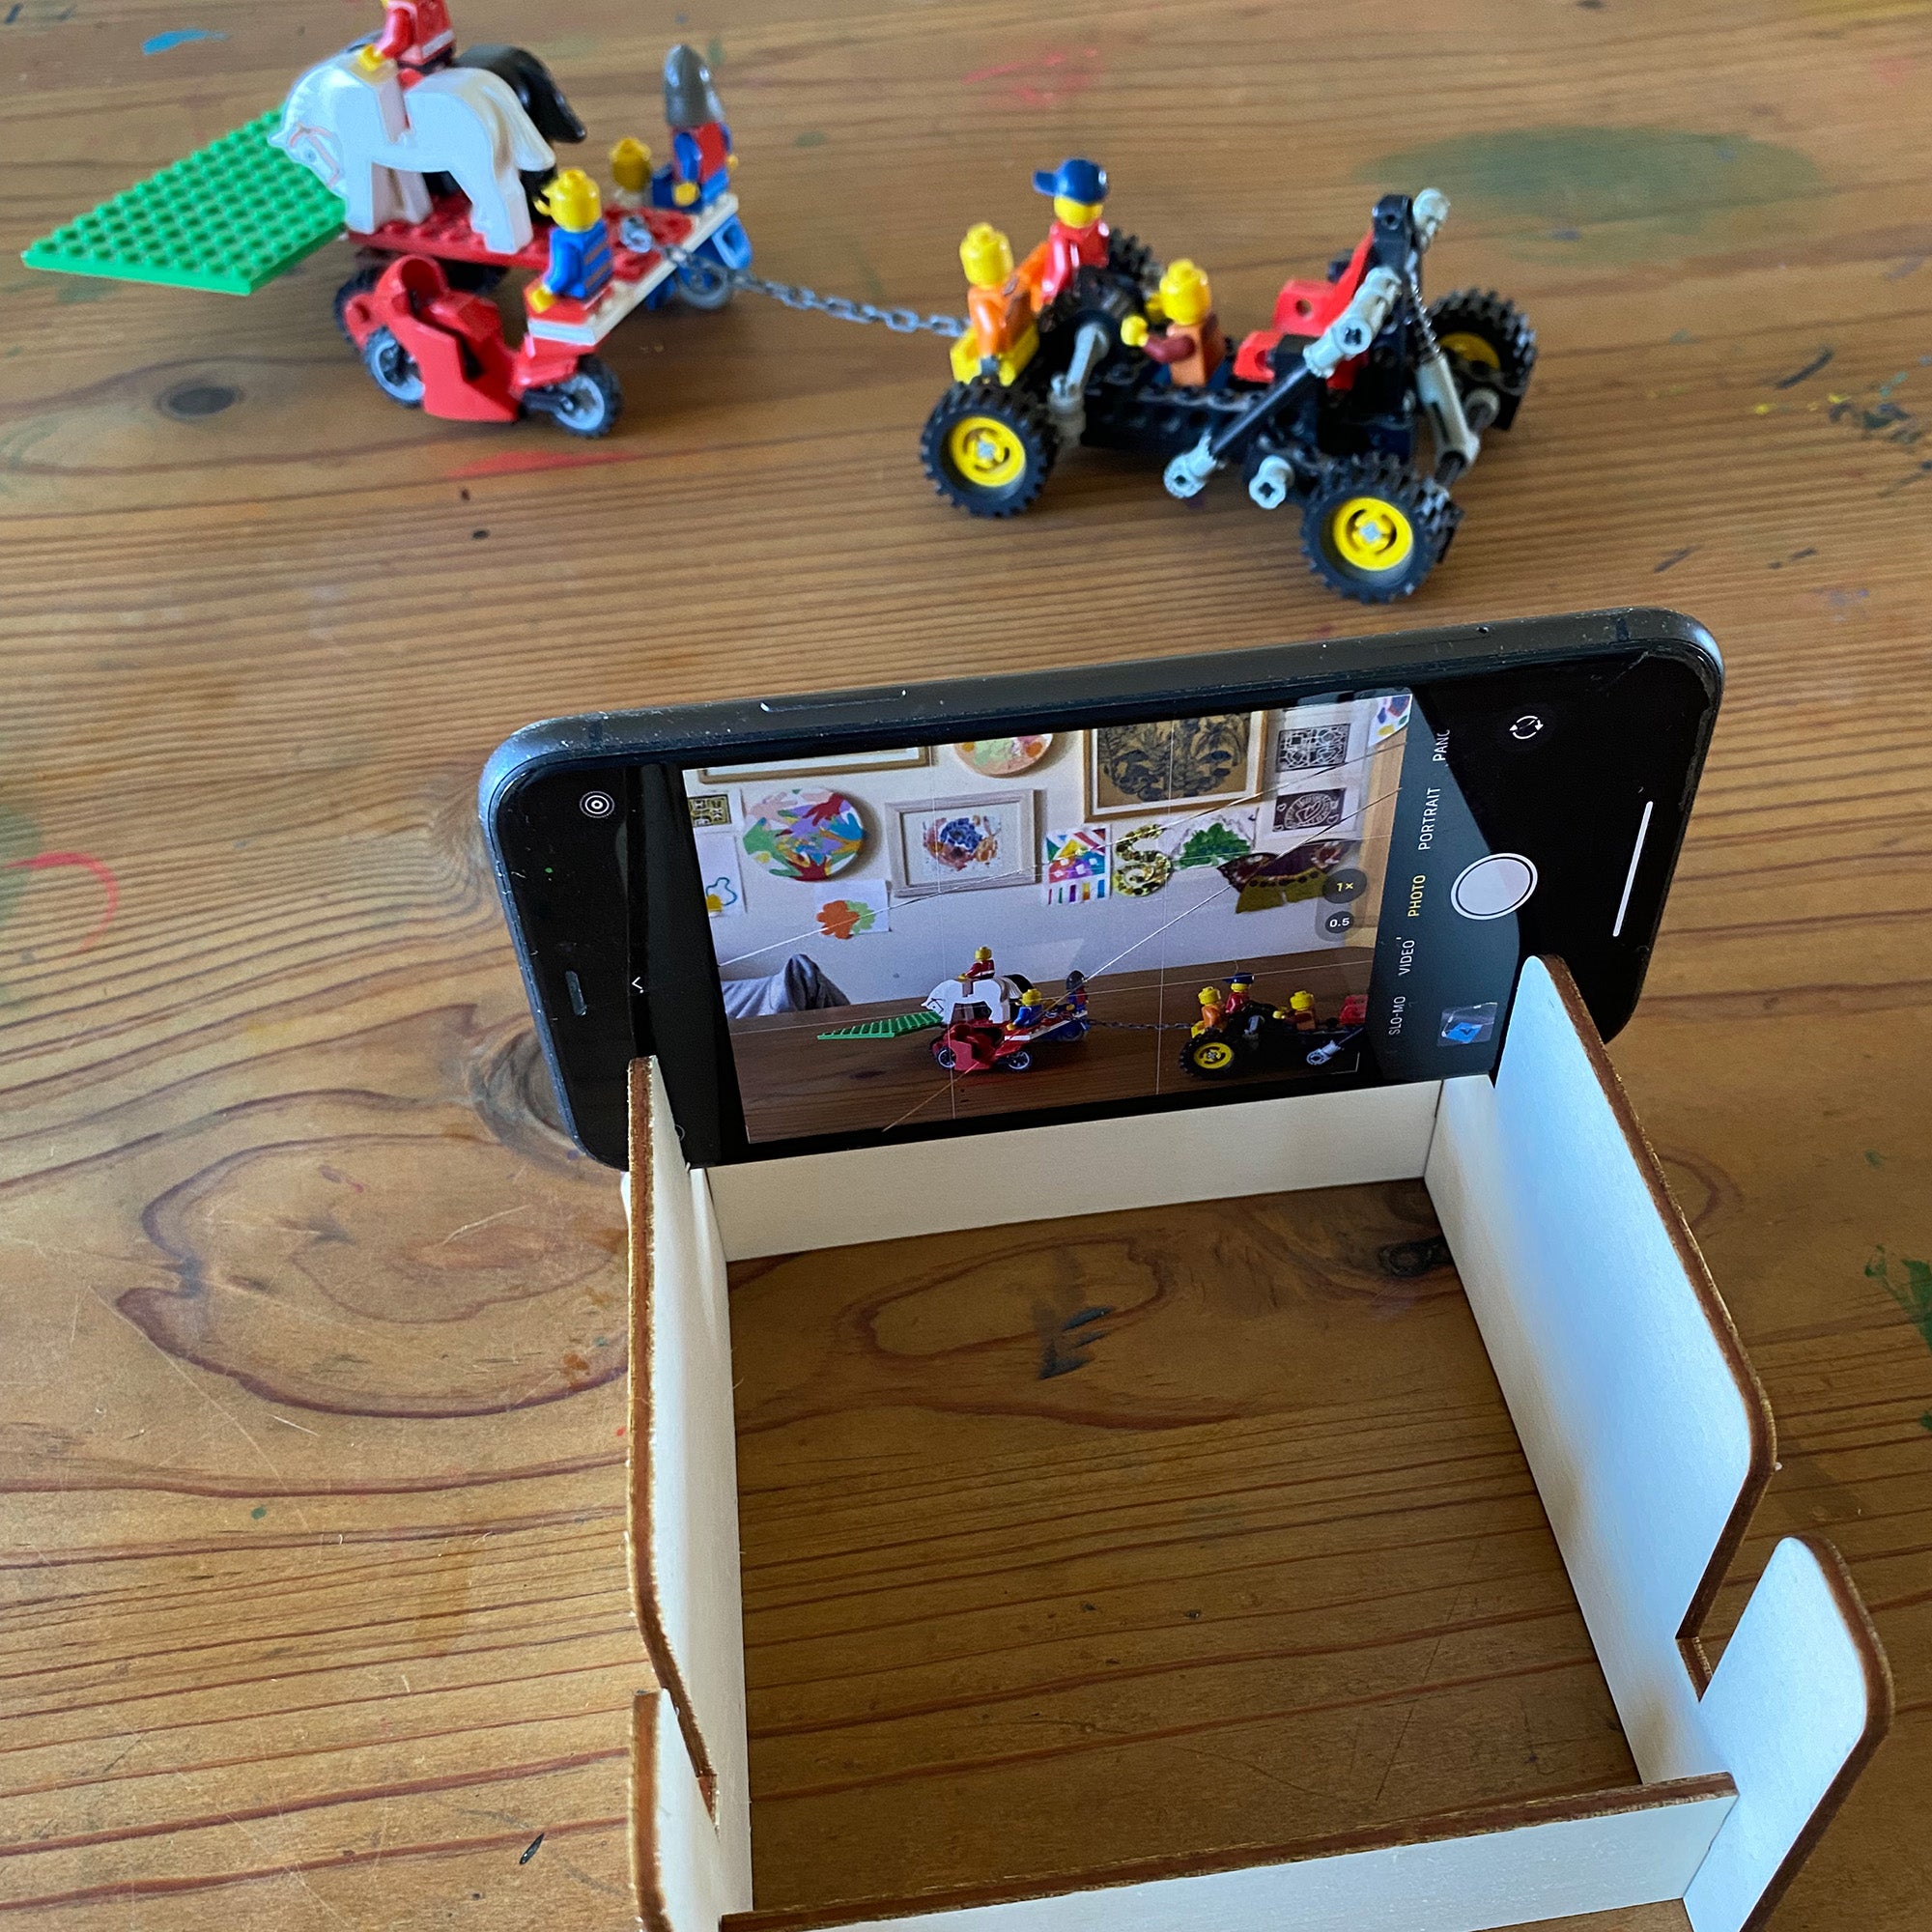 Phone or Tablet stand - Great for stop motion video!